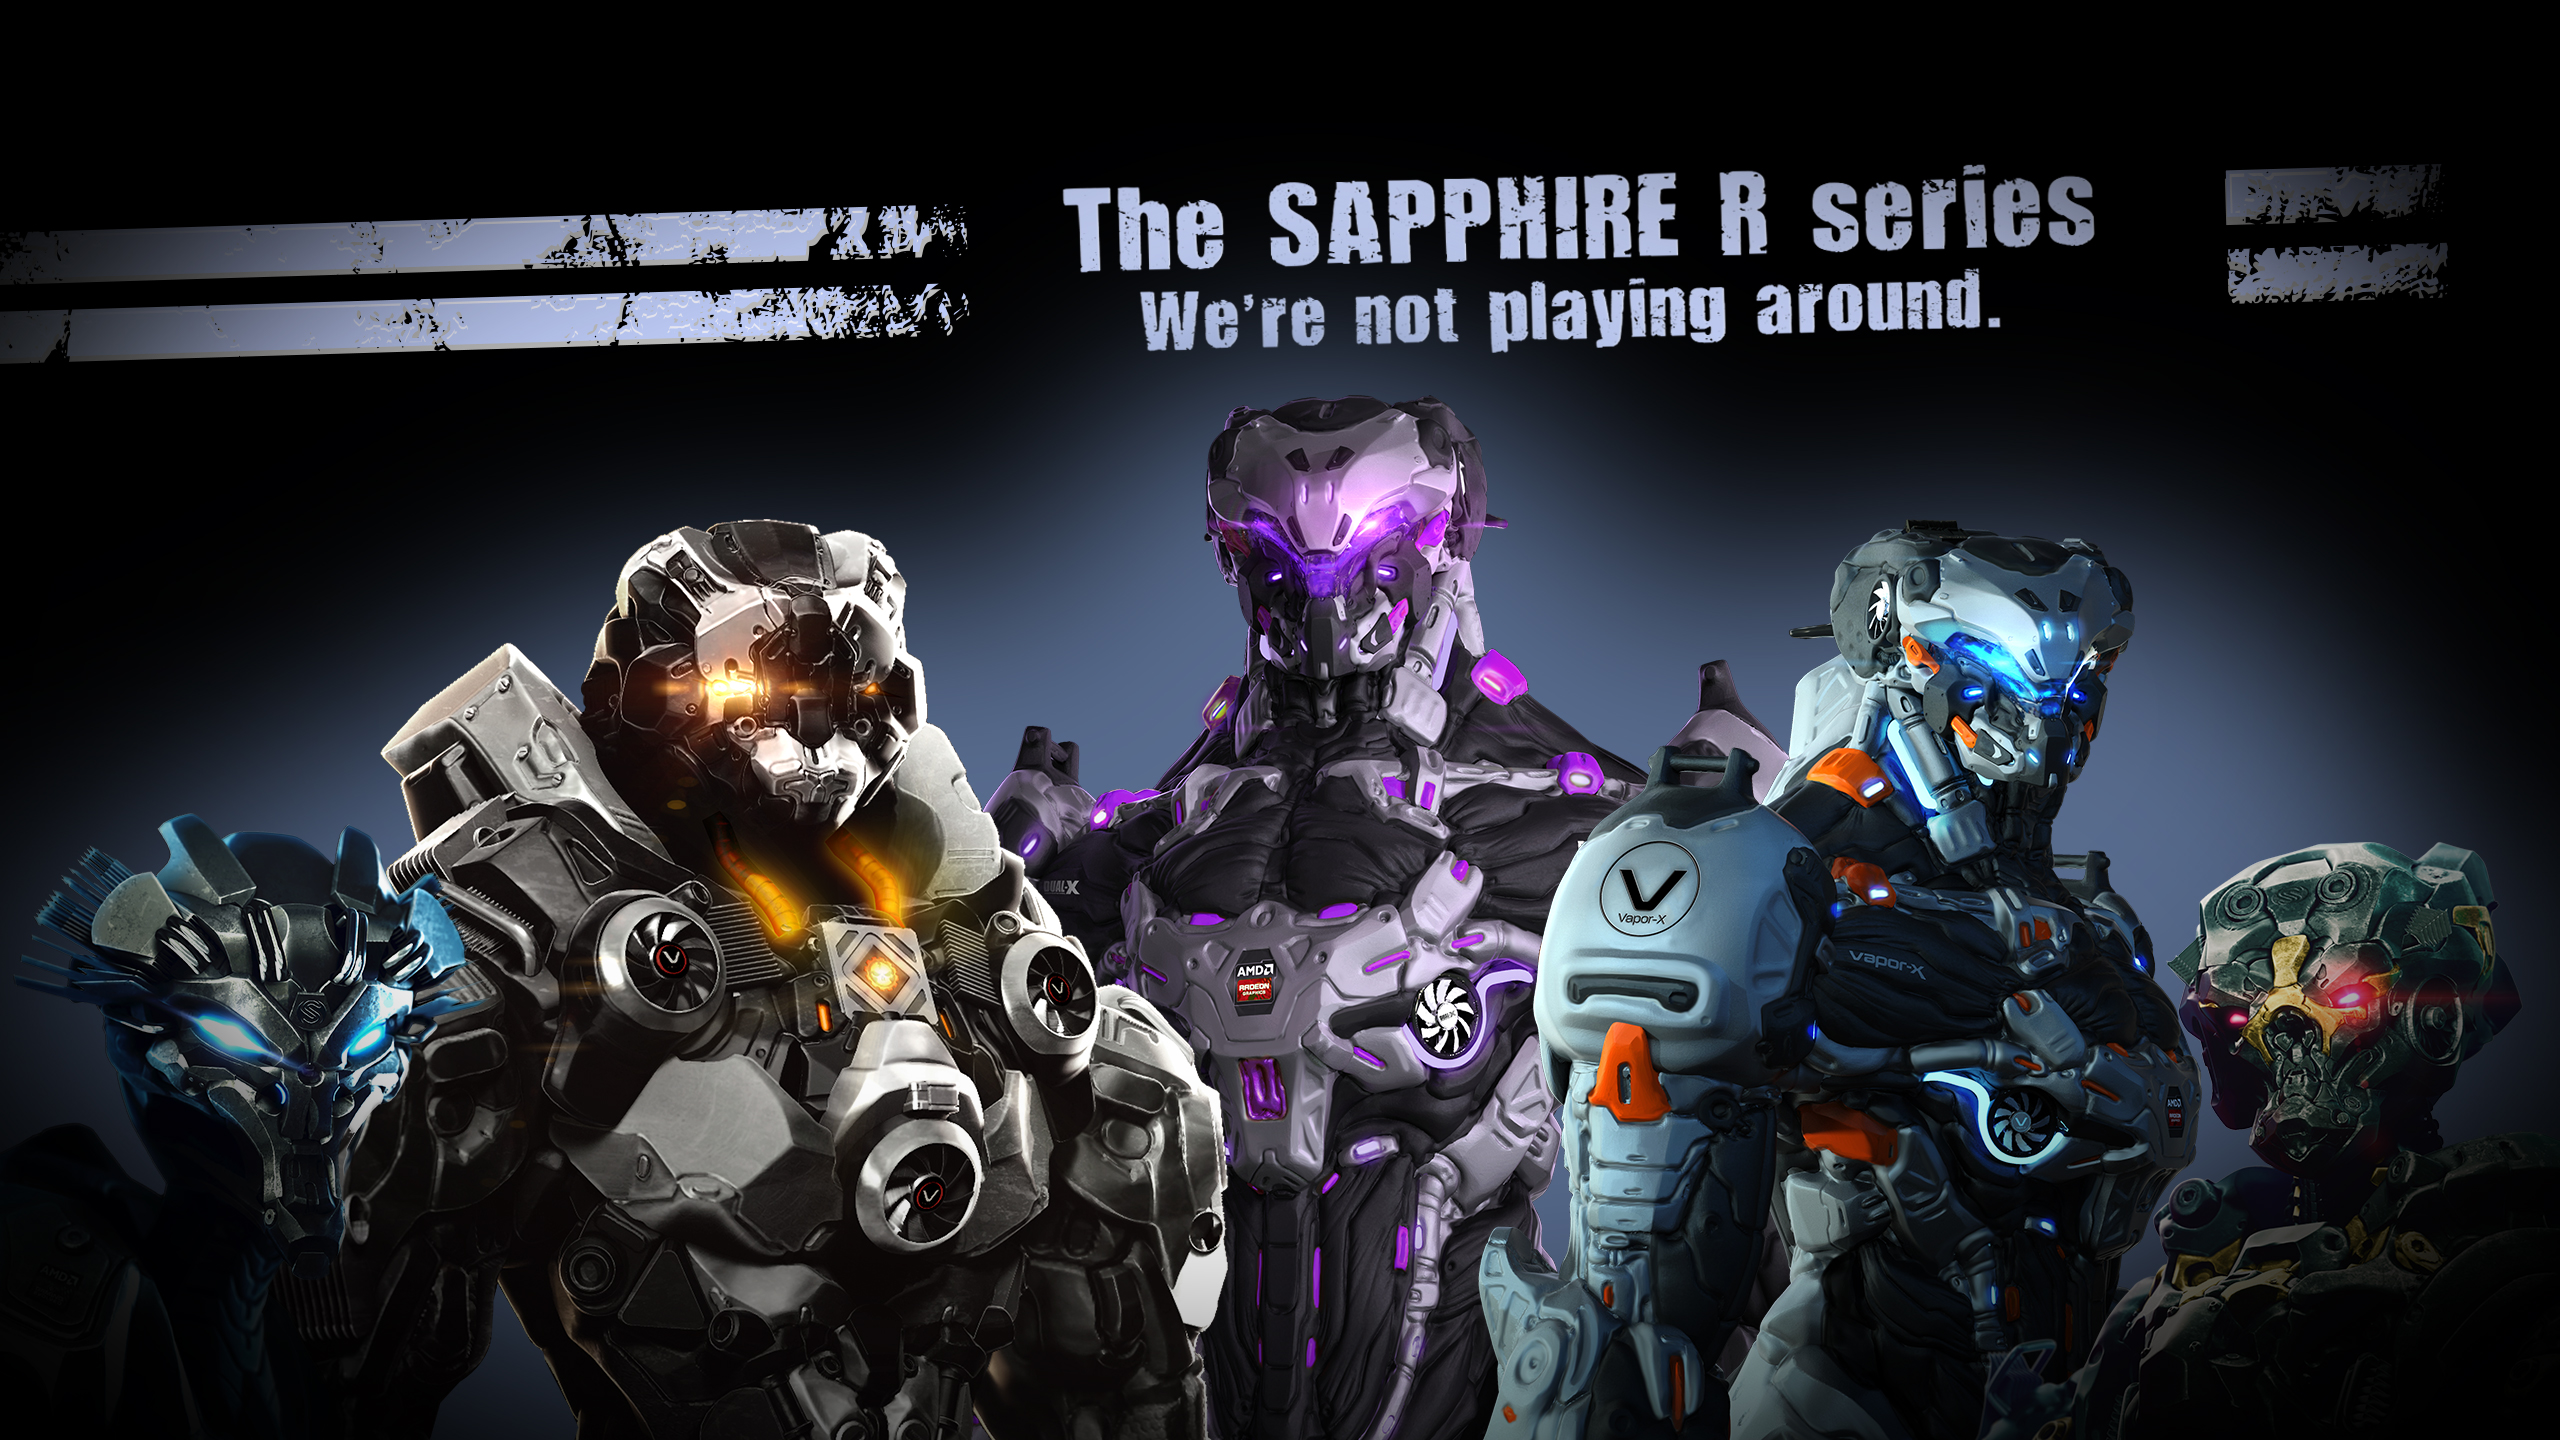 More Poisons From Sapphire 1440p Official R Series Wallpaper